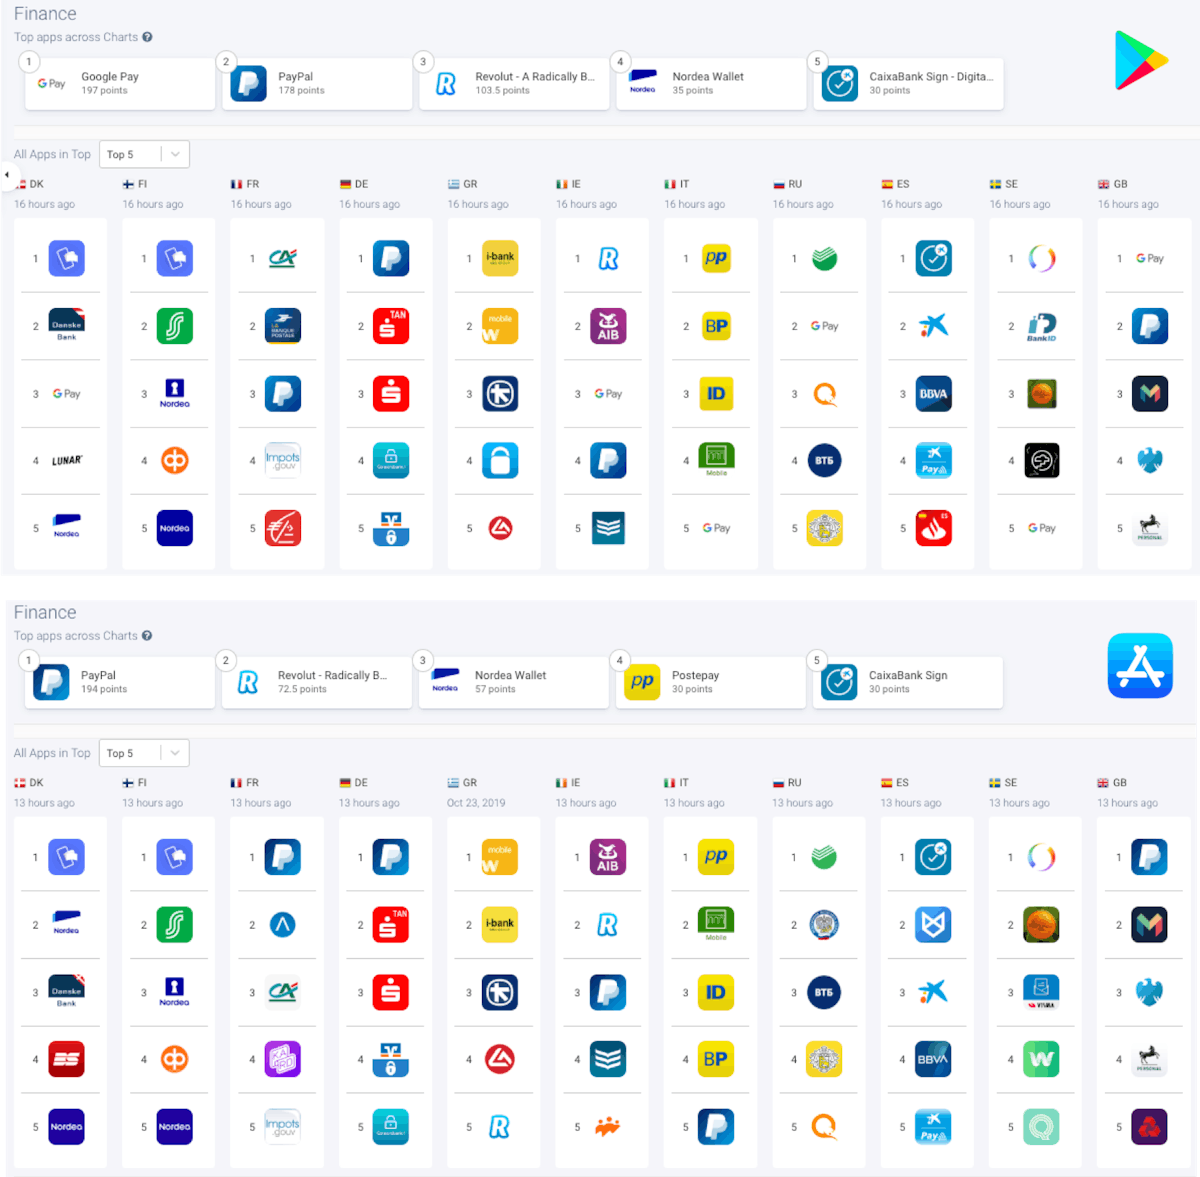 AppTweak Market Intelligence - Comparing the Apple App Store and Google Play Store Top Charts of the Finance Category in EU countries